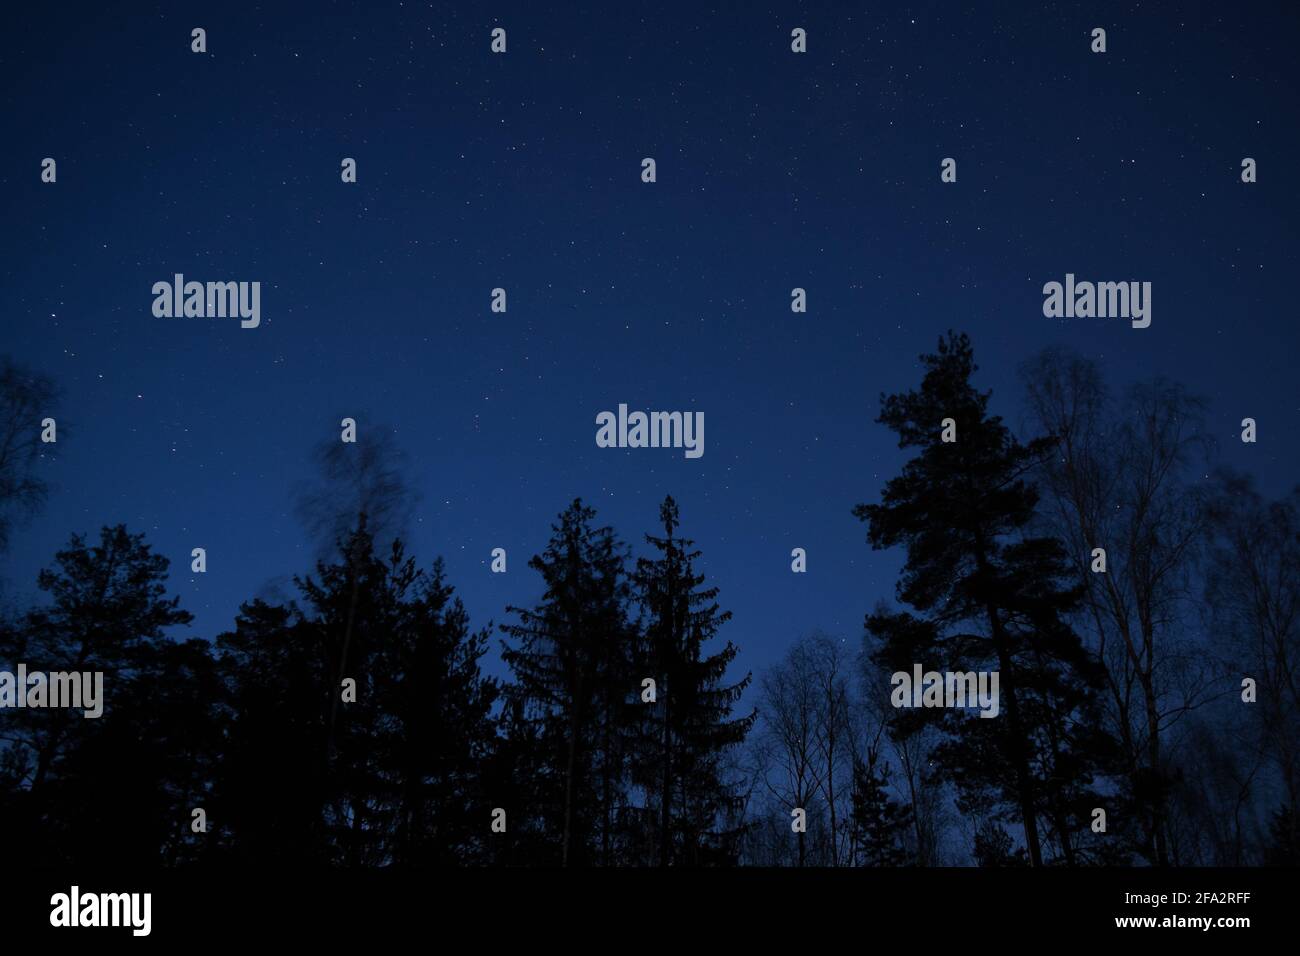 Black treetop silhouettes against a night sky full of stars Stock Photo